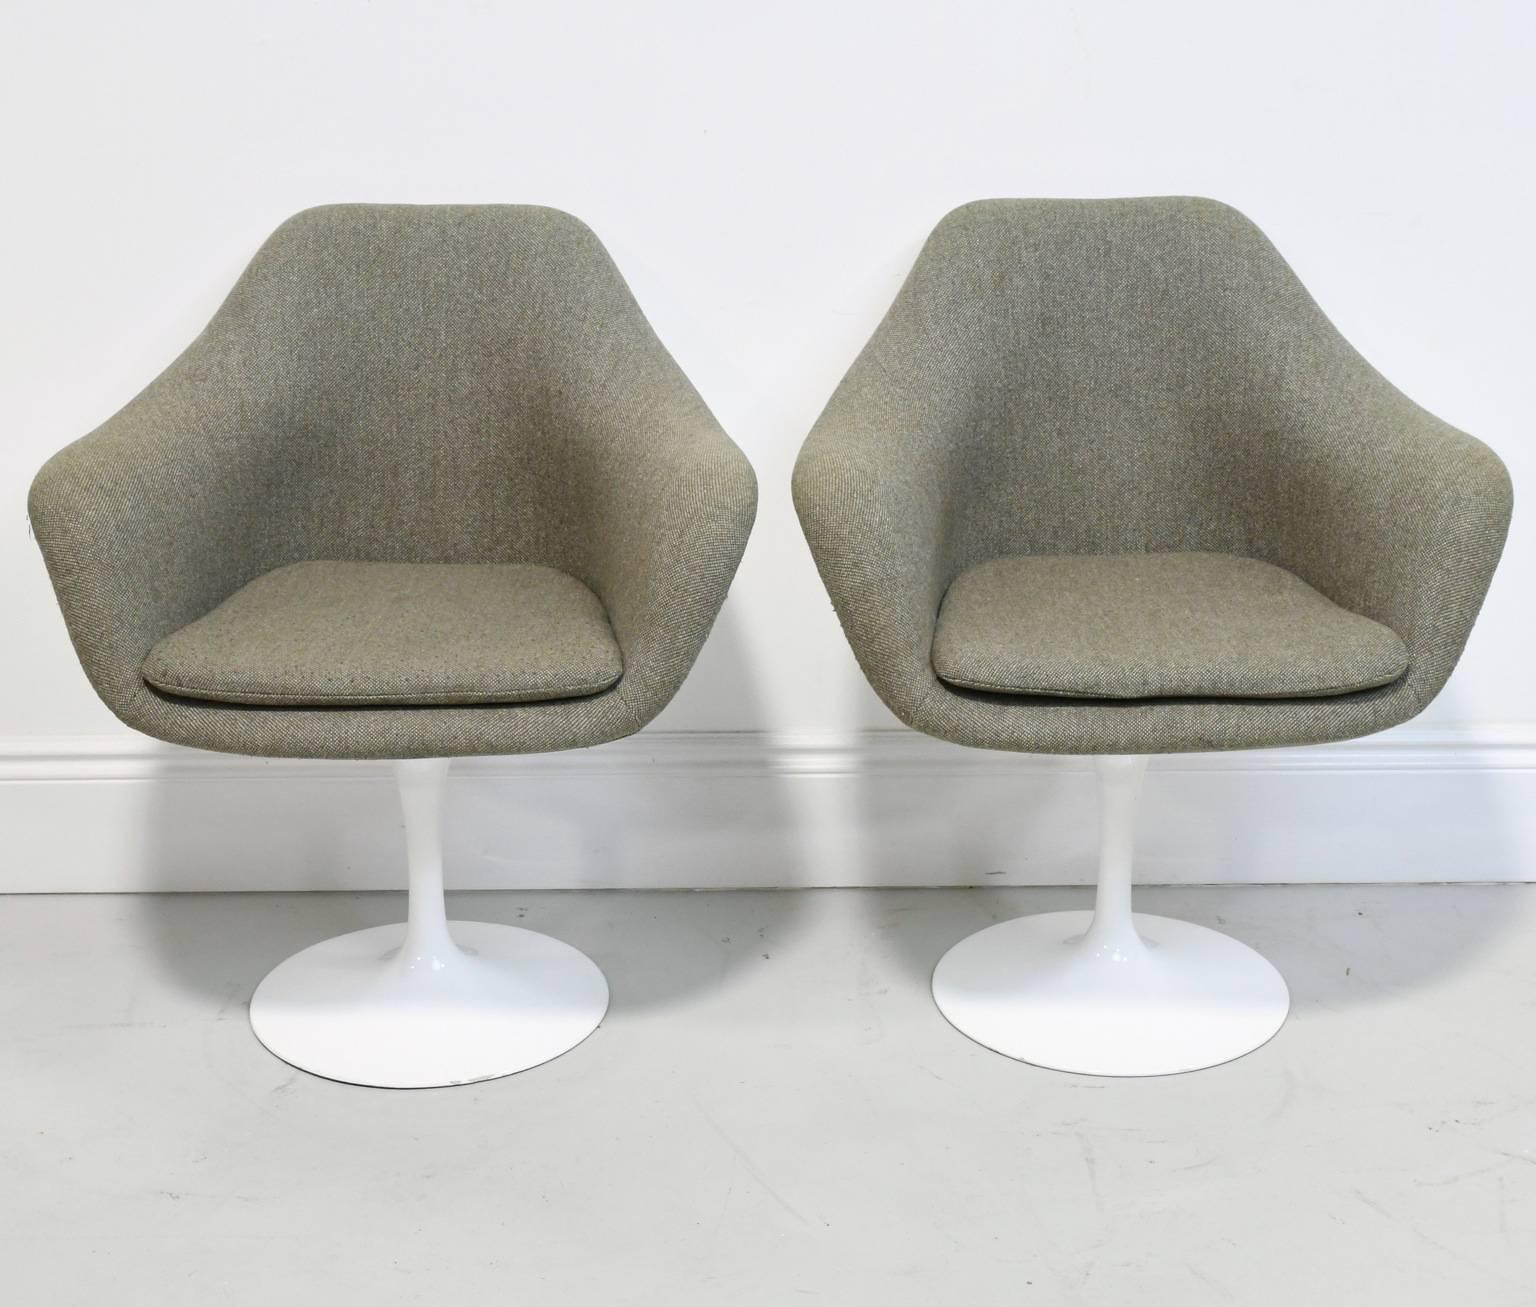 Pair of vintage knoll Eero Saarinen tulip chairs in good condition with original knoll fabric. The fully upholstered tulip armchair features an upholstered inner shell. Upholstered foam cushions are removable, with a zippered cover and Velcro